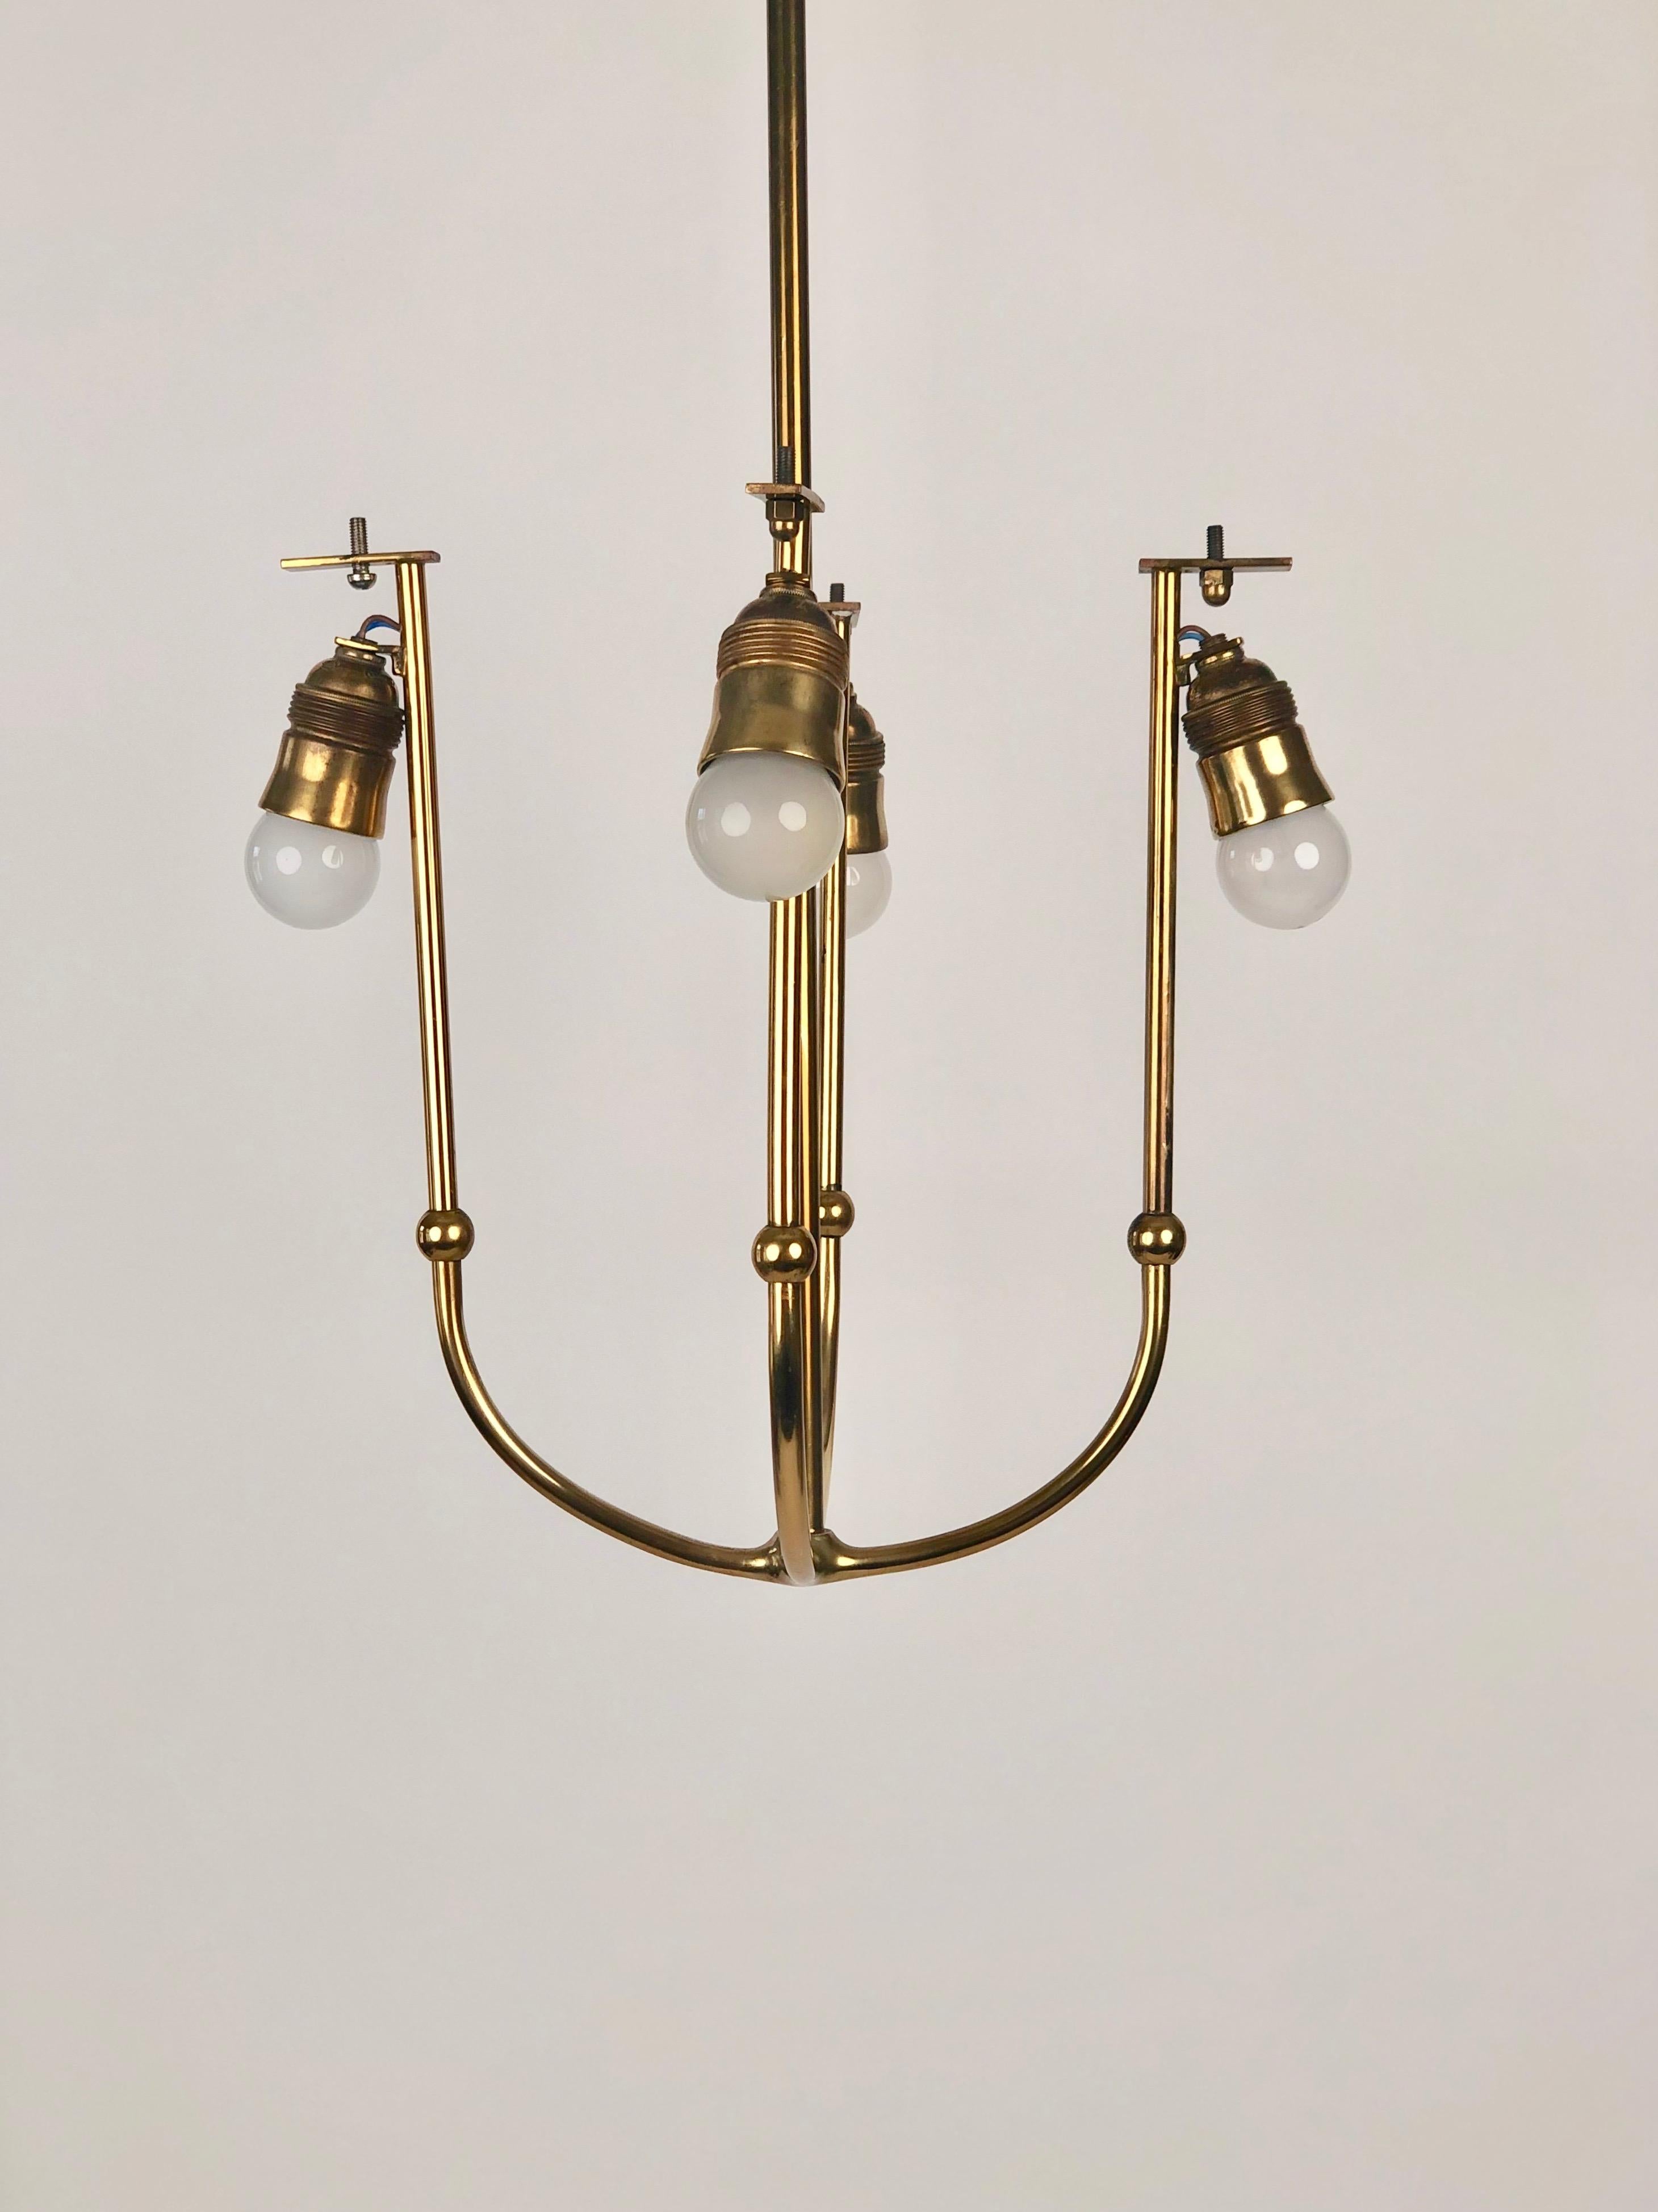 Four Arm Chandelier in Brass with Silk Shades , 1930's, Austria For Sale 5